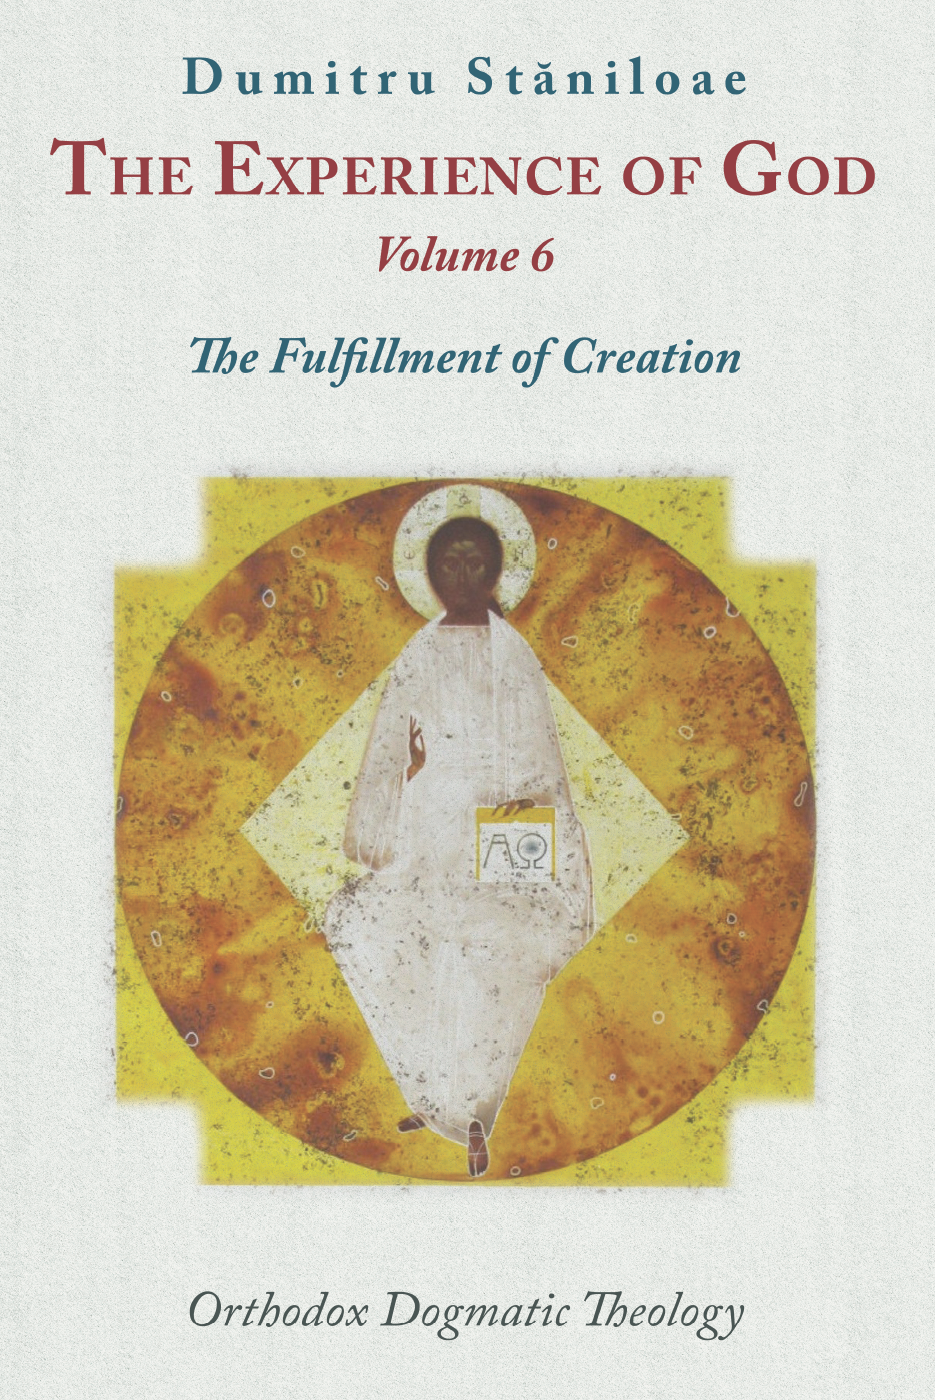 The Experience of God, Vol. 6: The Fulfillment of Creation